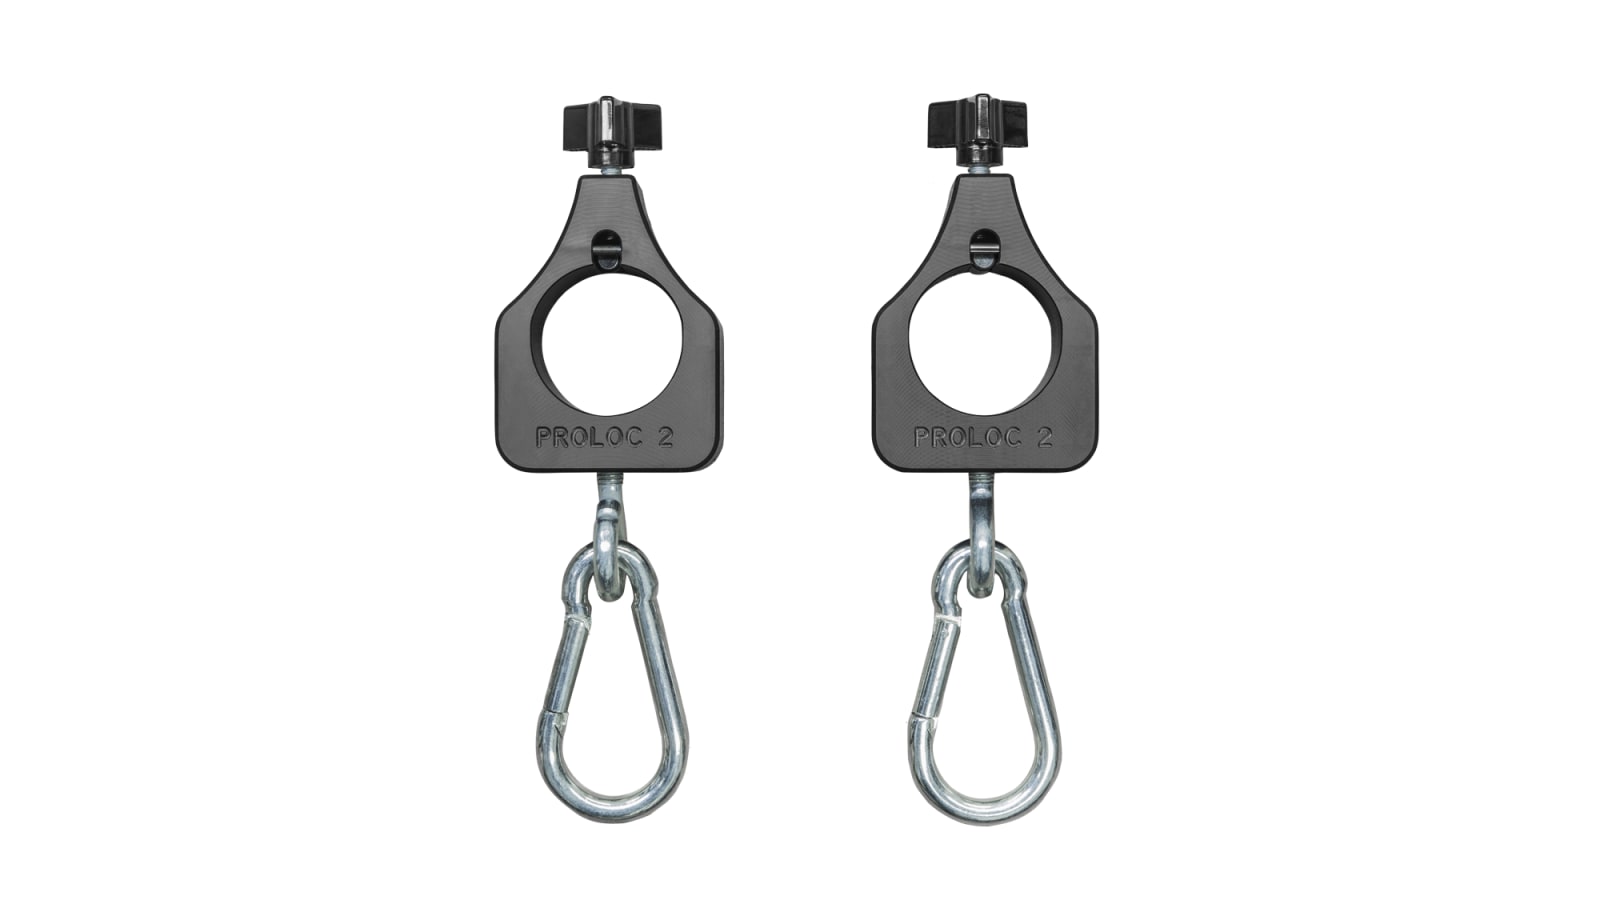 Easily Connect Chains & Resistance Bands for Intensive Workouts Solid Steel Chain Beast Collar with Commercial Strength Eye Bolt Carabiners & Bar modifiers ALLN-1 F2 Barbell Chain Beast Collar